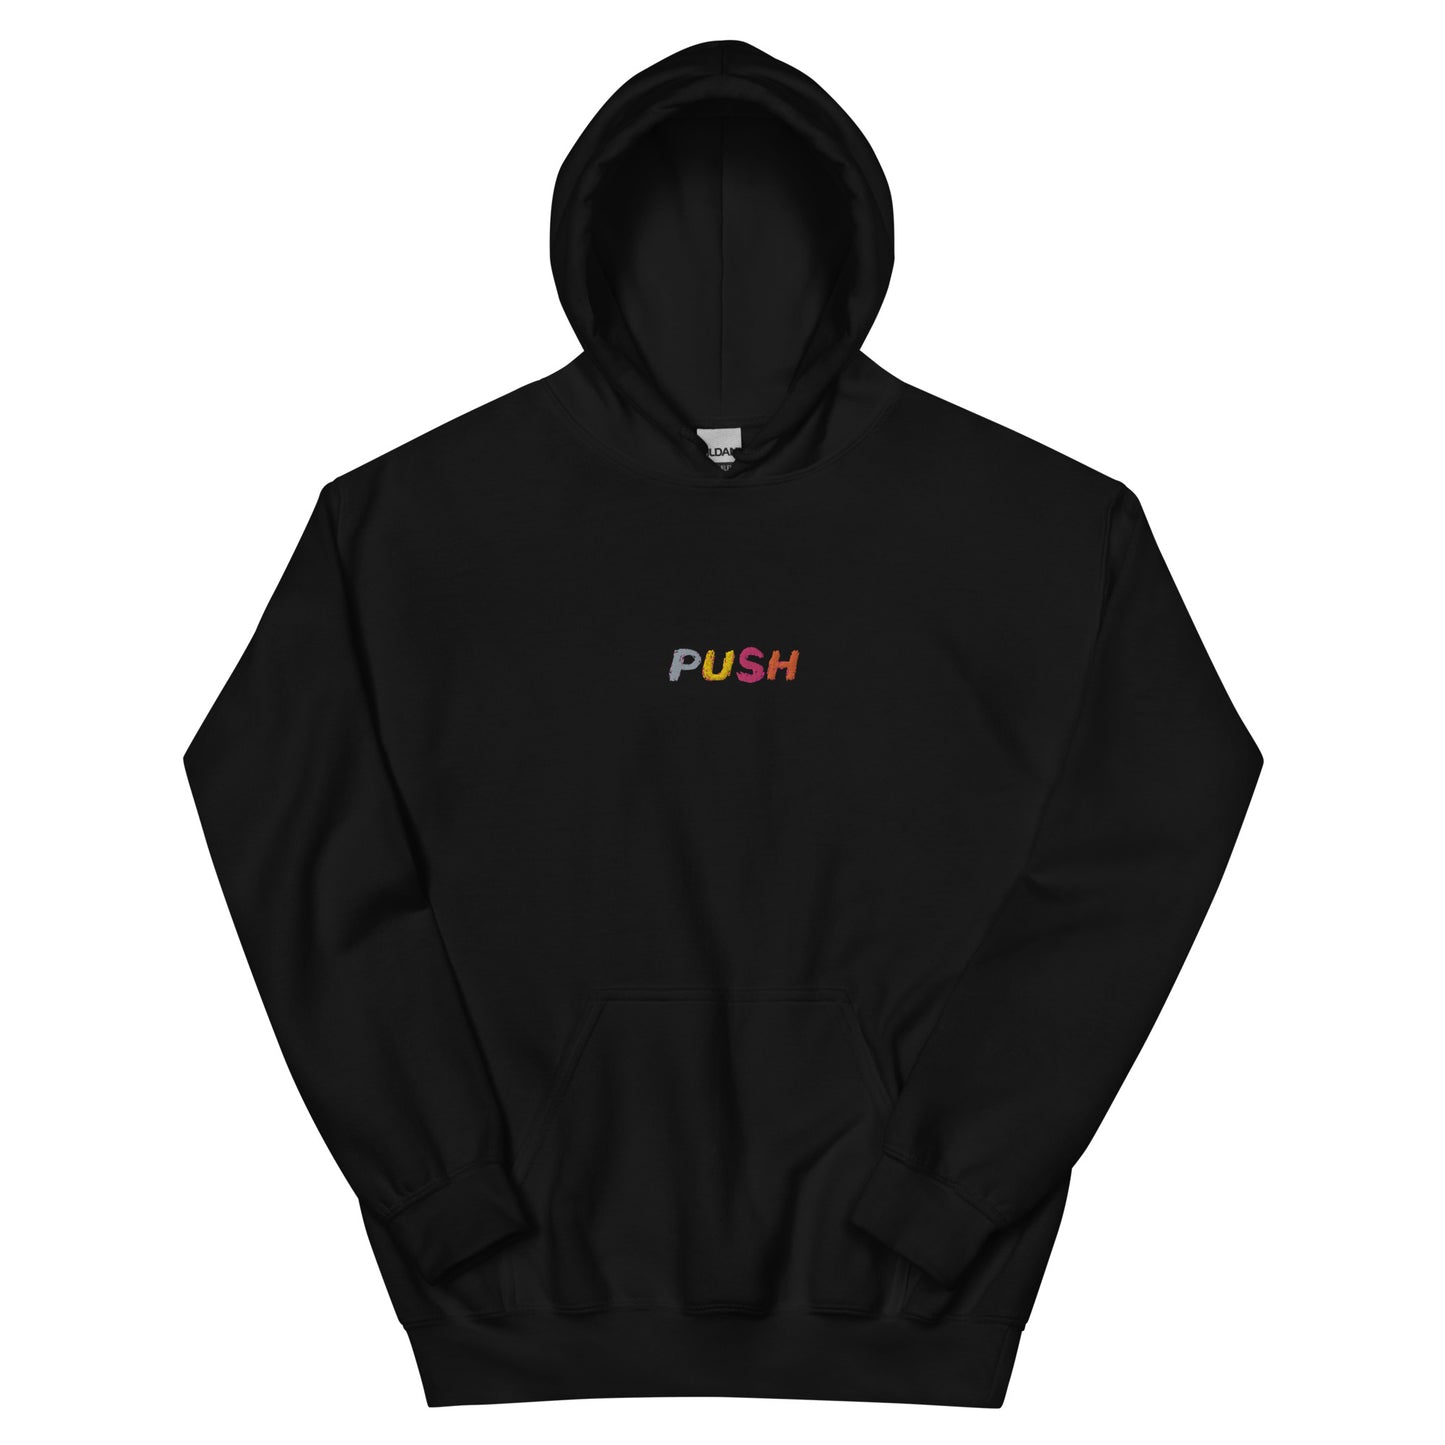 PUSH Embroidered Hoodie - black / S - Shirts & Tops